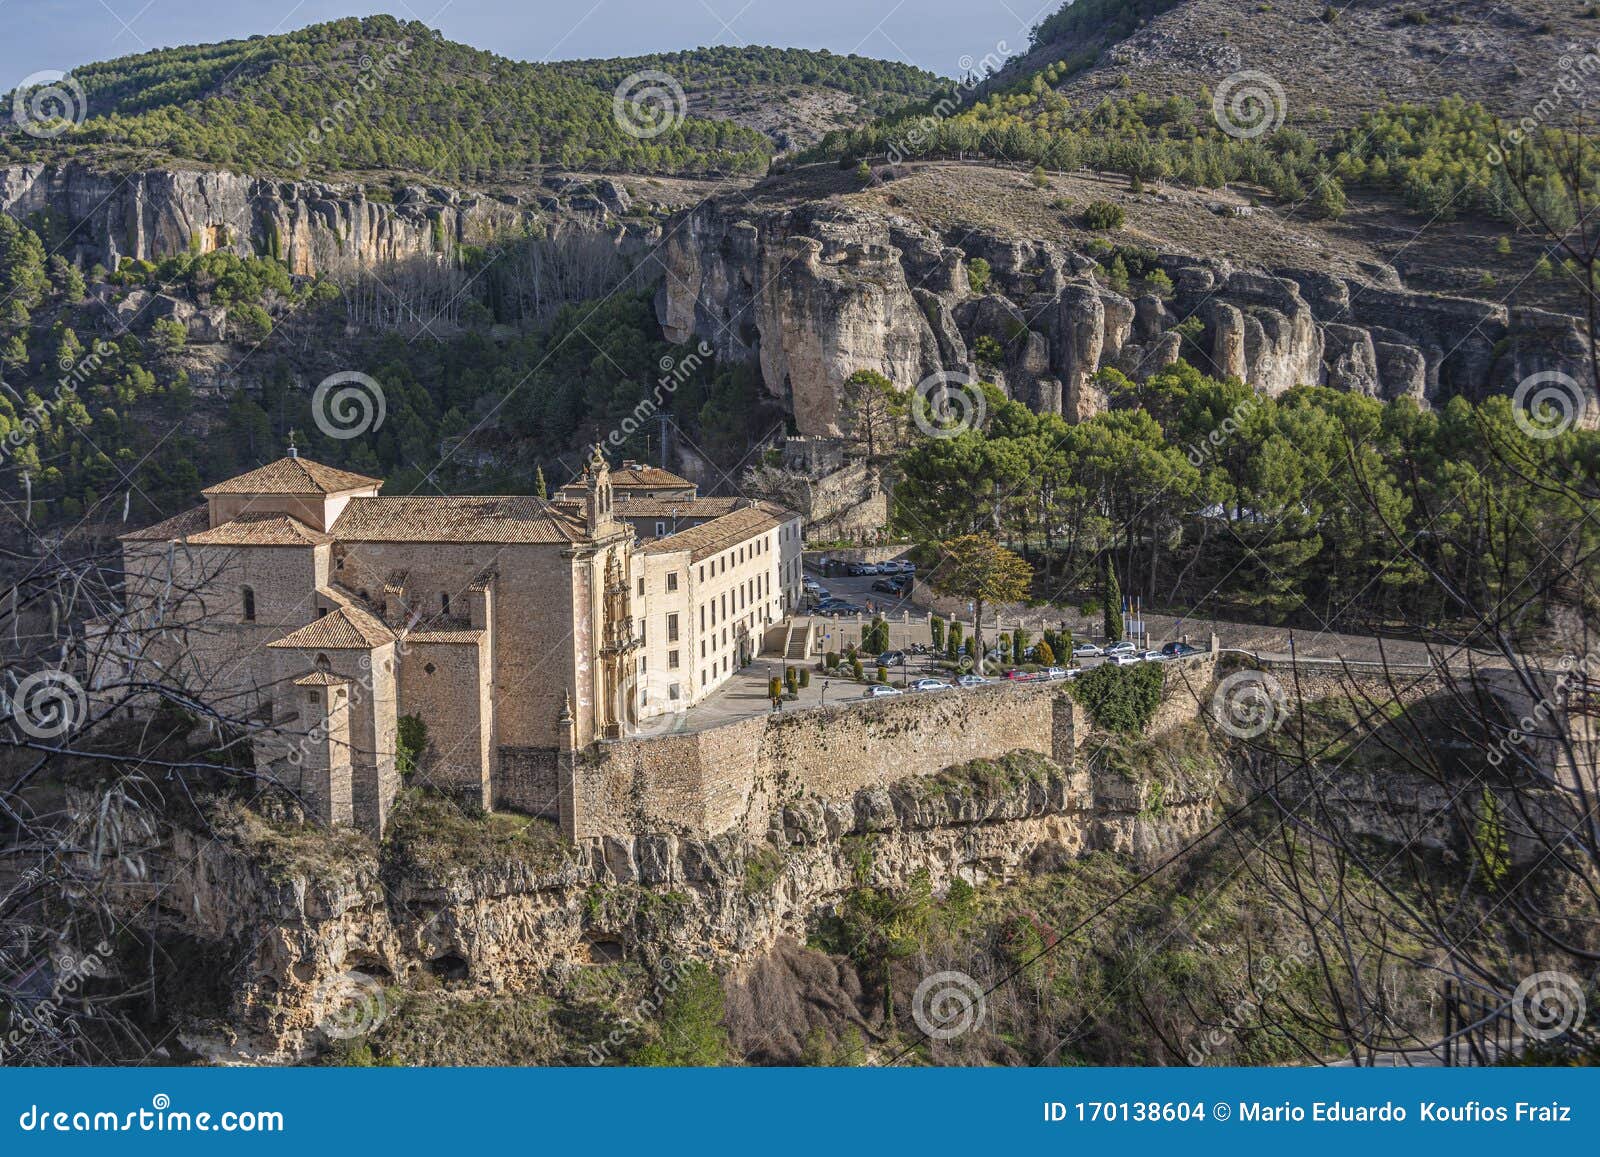 former convent in the sickles of huecar river.cuenca city. europe spain